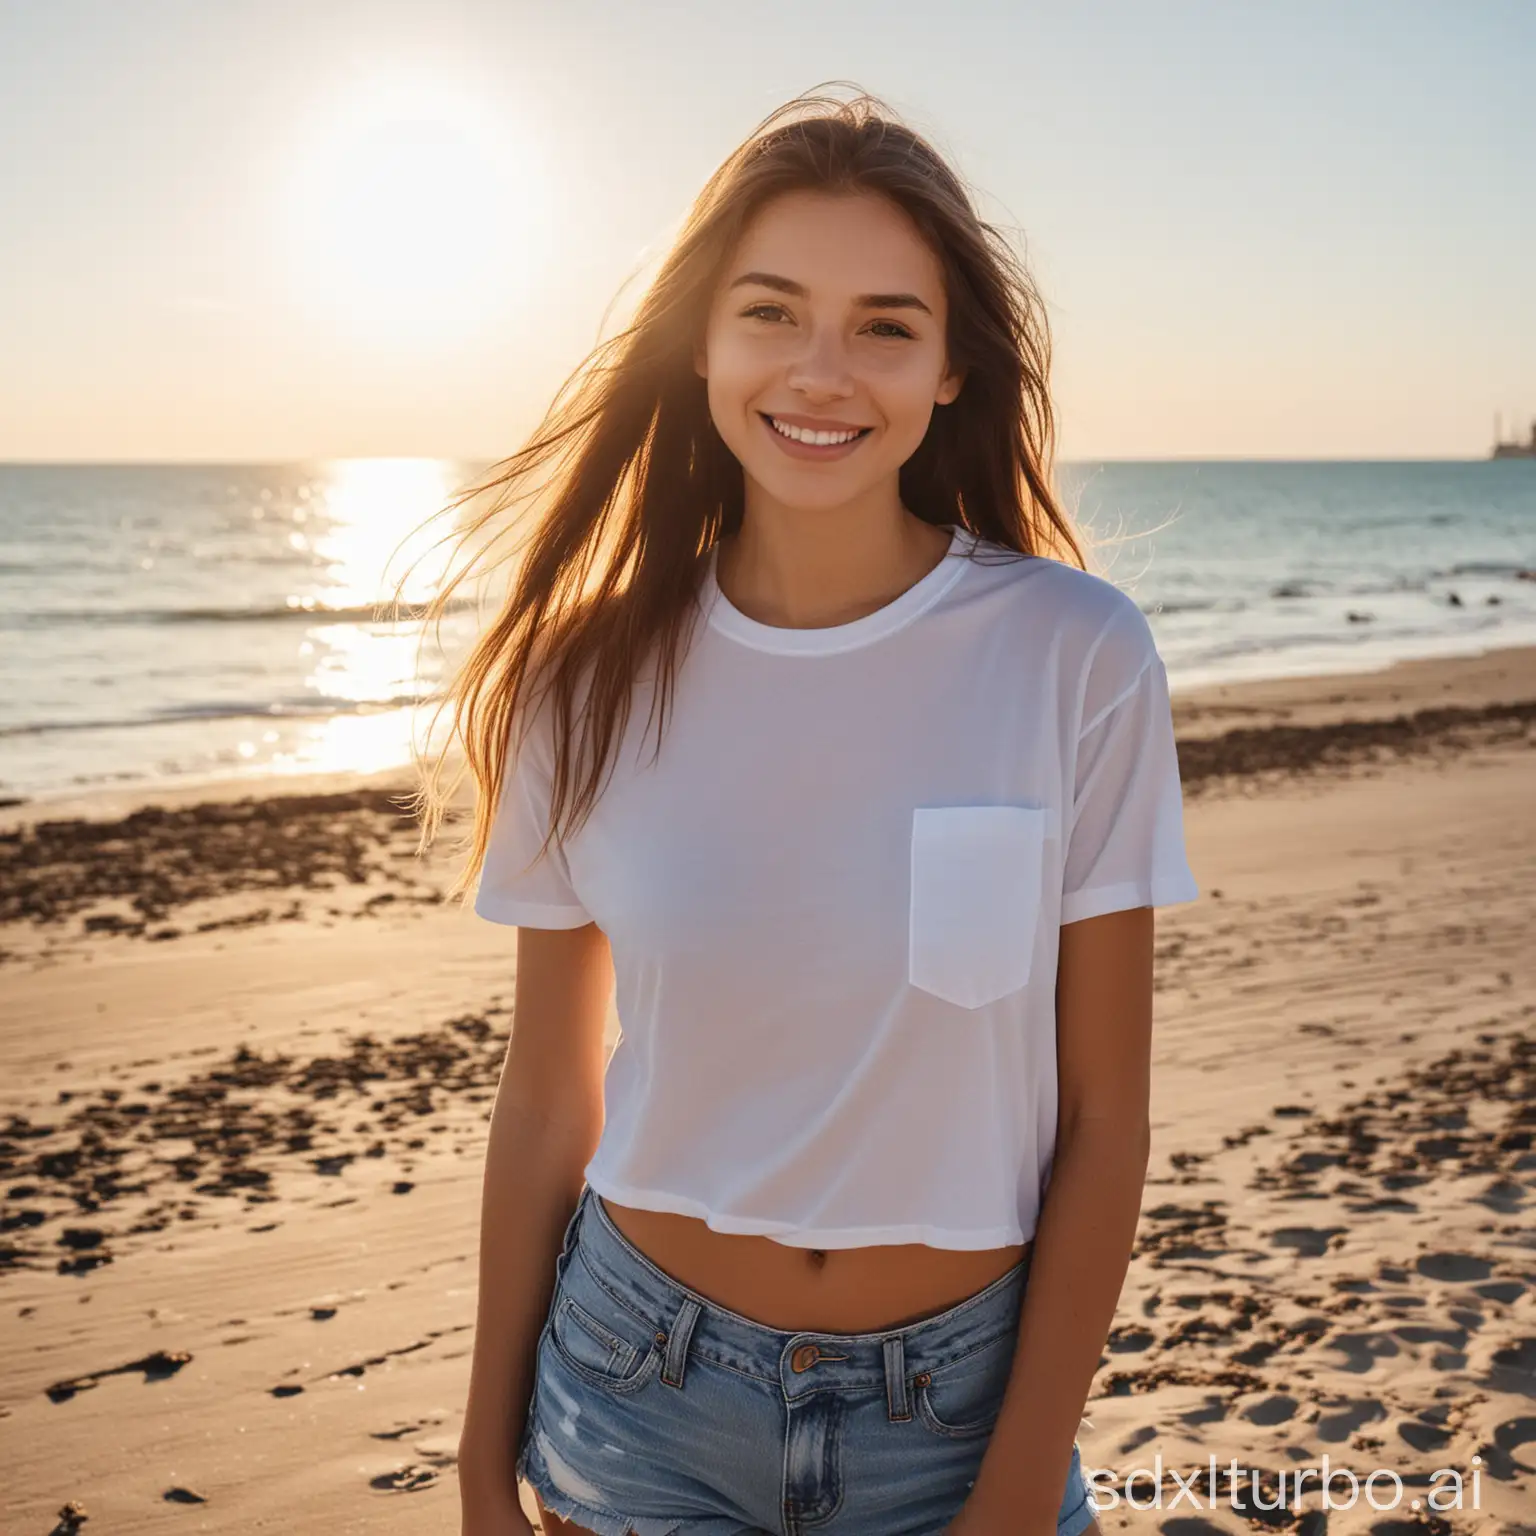 Smiling-Young-Woman-in-White-Tshirt-and-Denim-Shorts-on-Beach